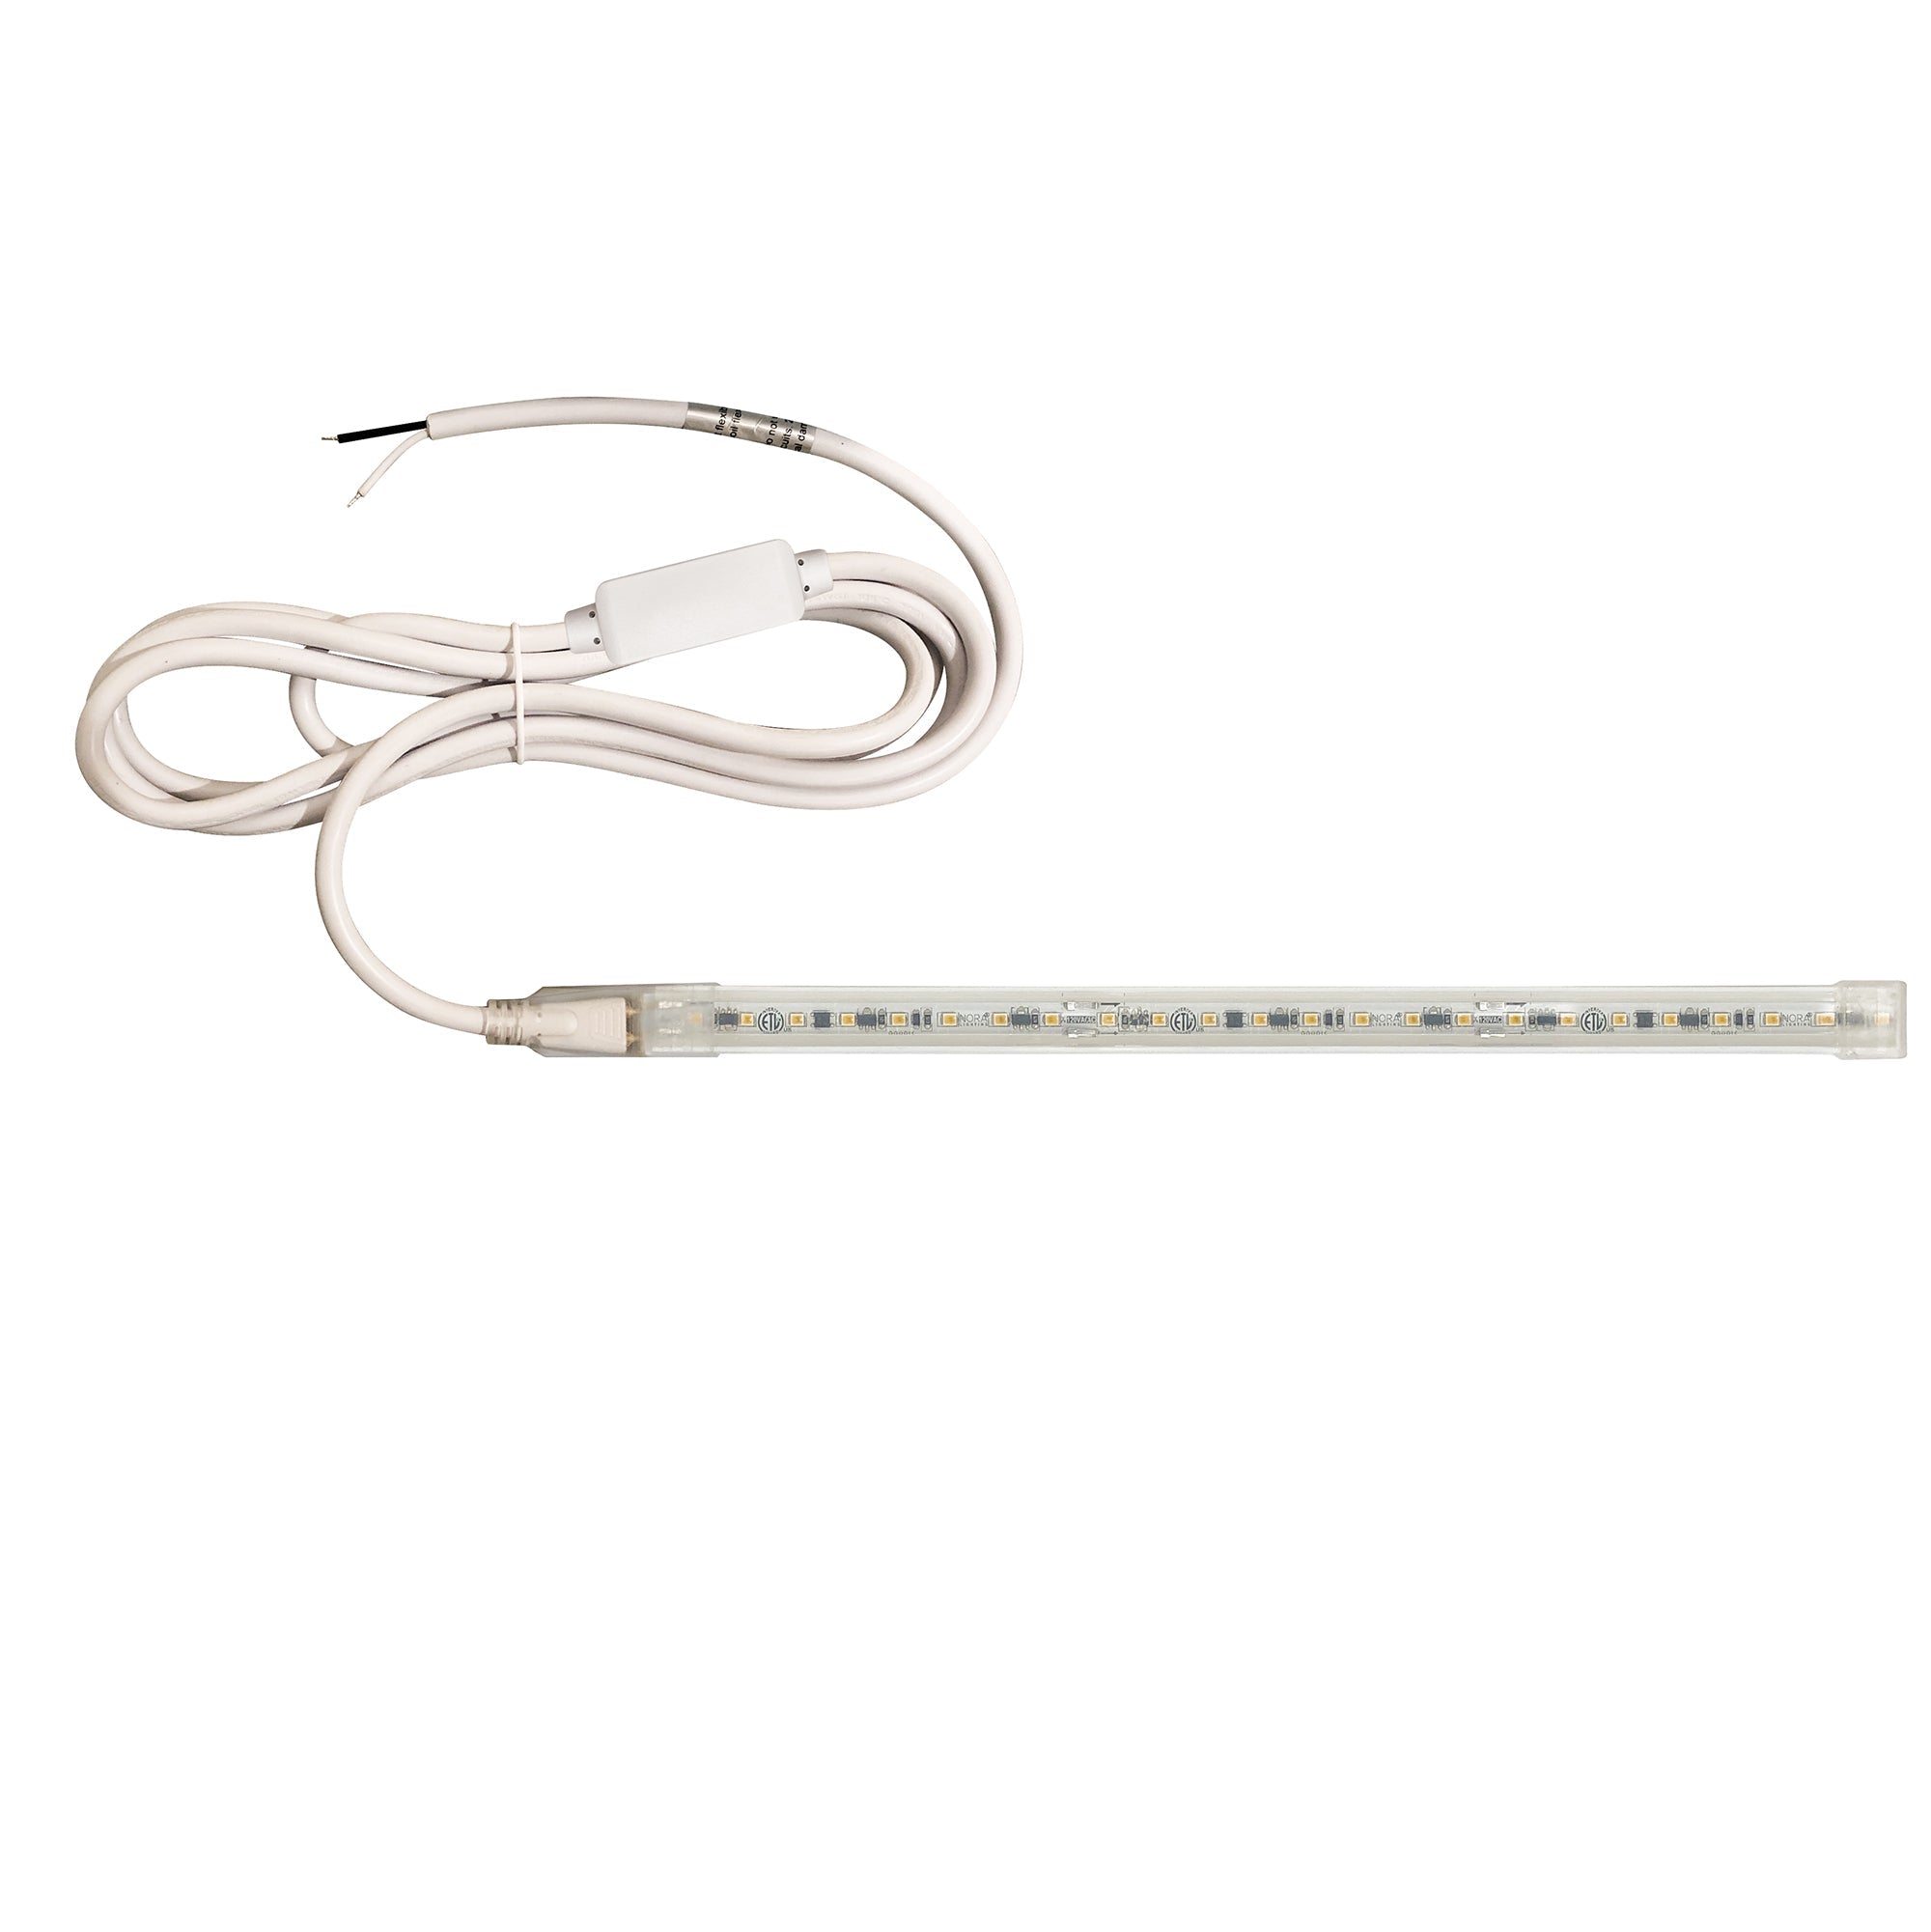 Nora Lighting NUTP13-W73-4-12-930/HWSP - Accent / Undercabinet - Custom Cut 73-ft, 4-in 120V Continuous LED Tape Light, 330lm / 3.6W per foot, 3000K, w/ Mounting Clips and 8' Hardwired Power Cord w/ Surge Protector